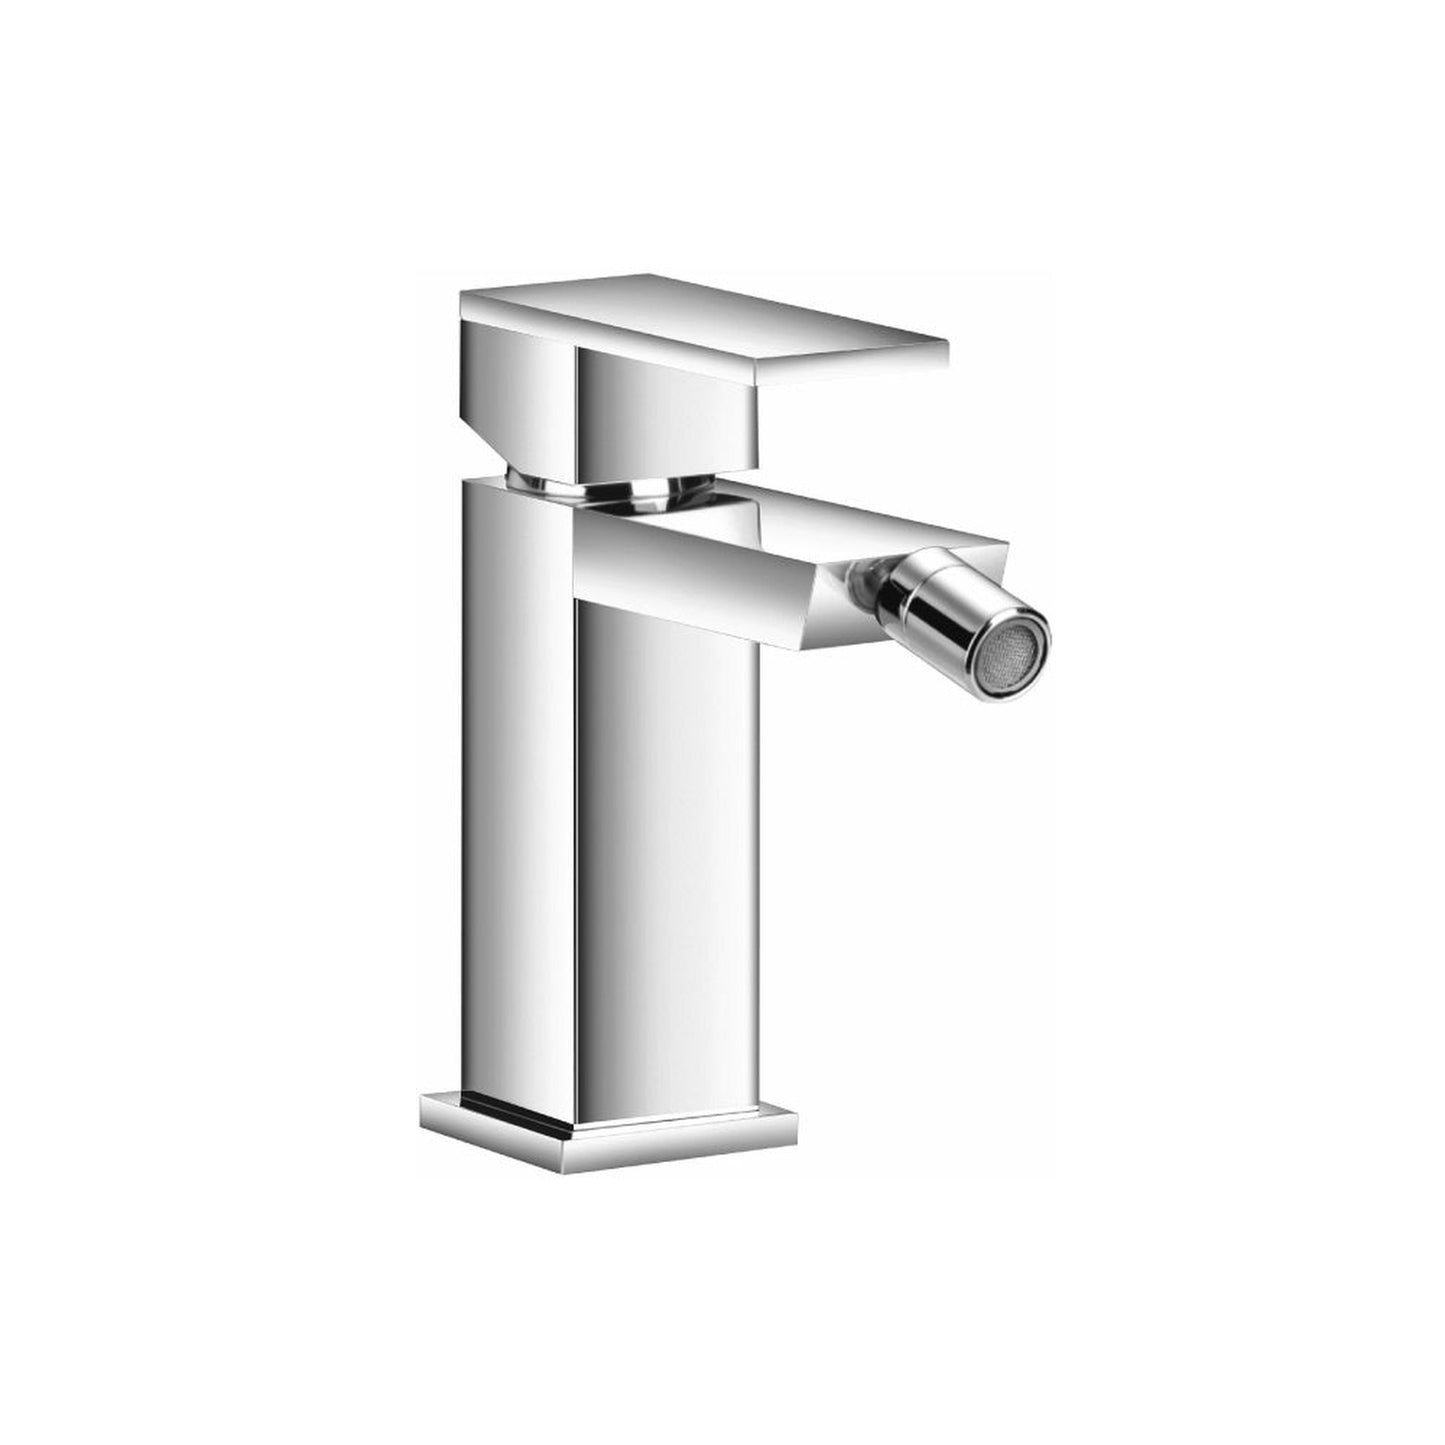 Isenberg Serie 160 6" Single-Hole Chrome Solid Brass Bidet Faucet With Drain